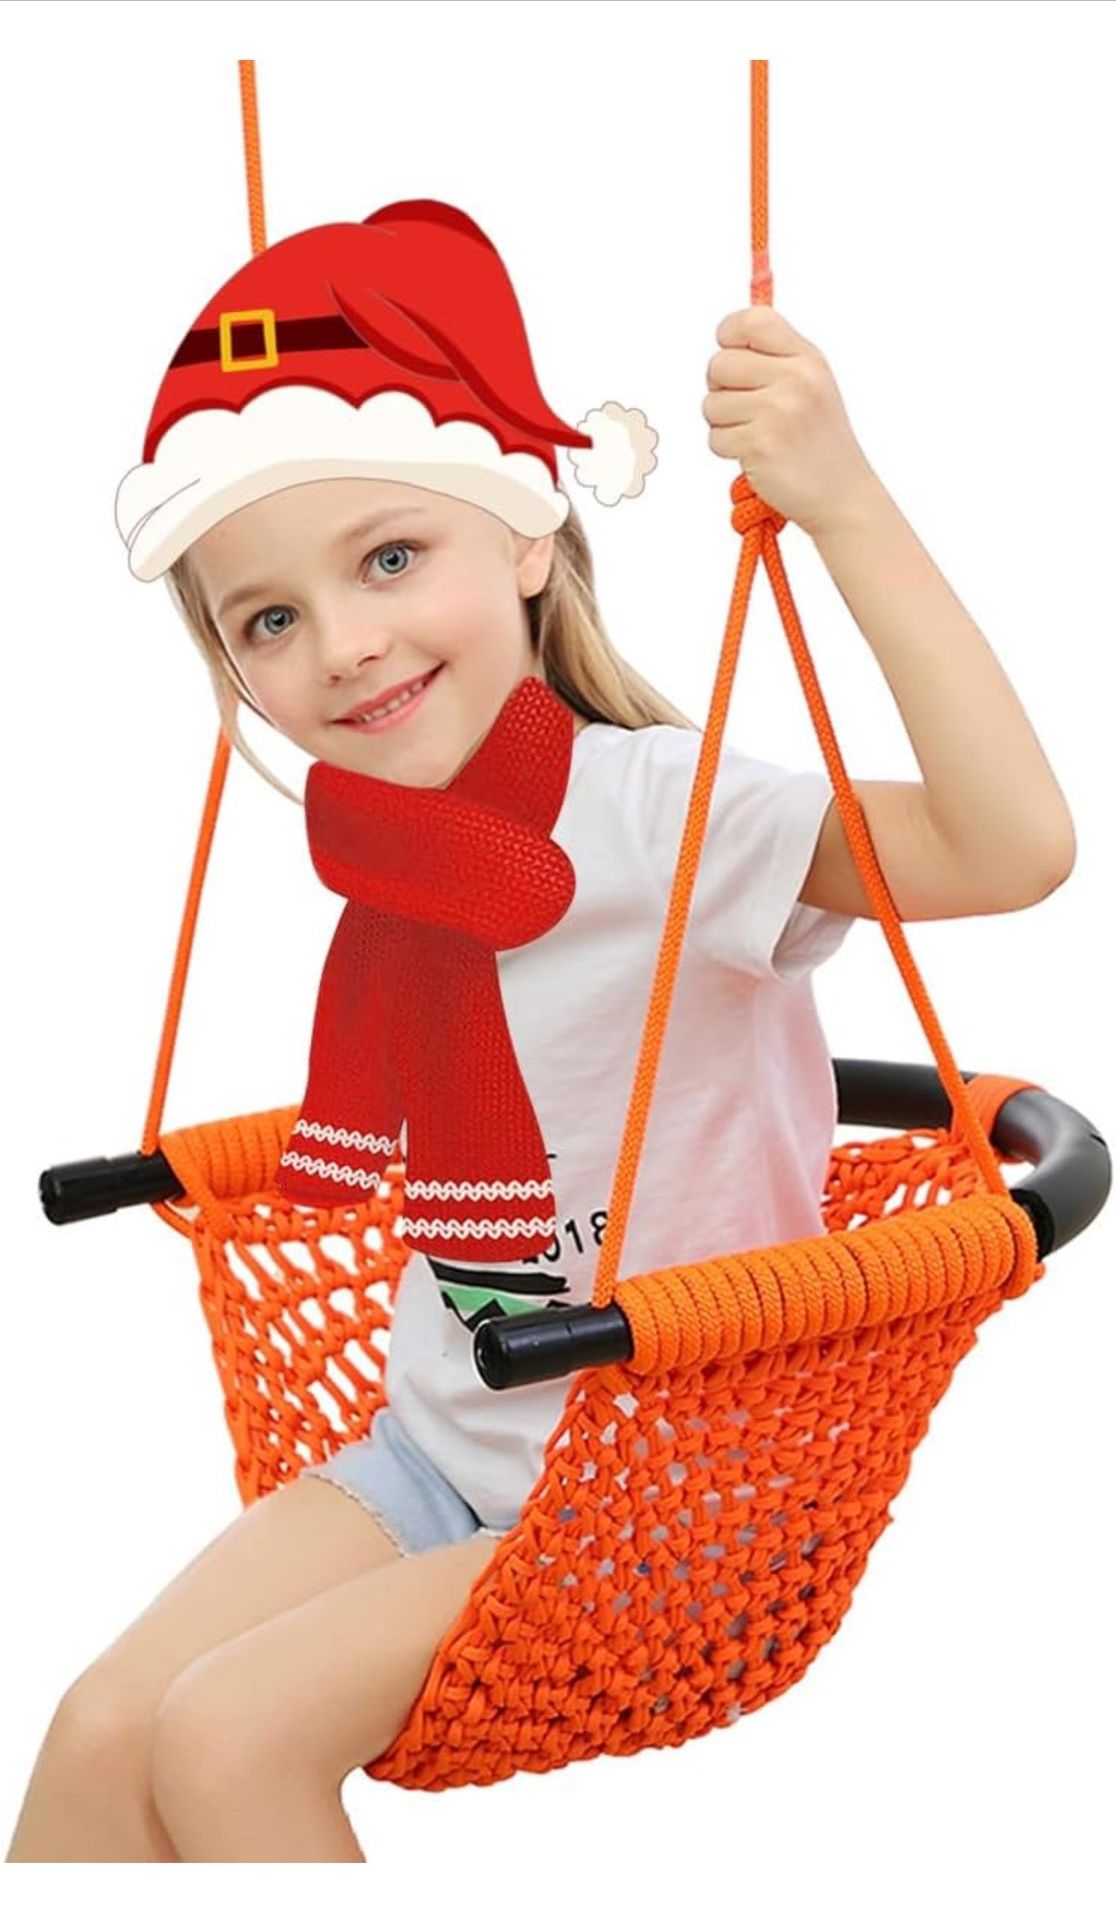 Hand-Knitting Toddler Swing, Swing Seat for Kids with Adjustable Ropes, Little tikes Swing Set, for Outdoor Indoor, Playground, Backyard (Orange)